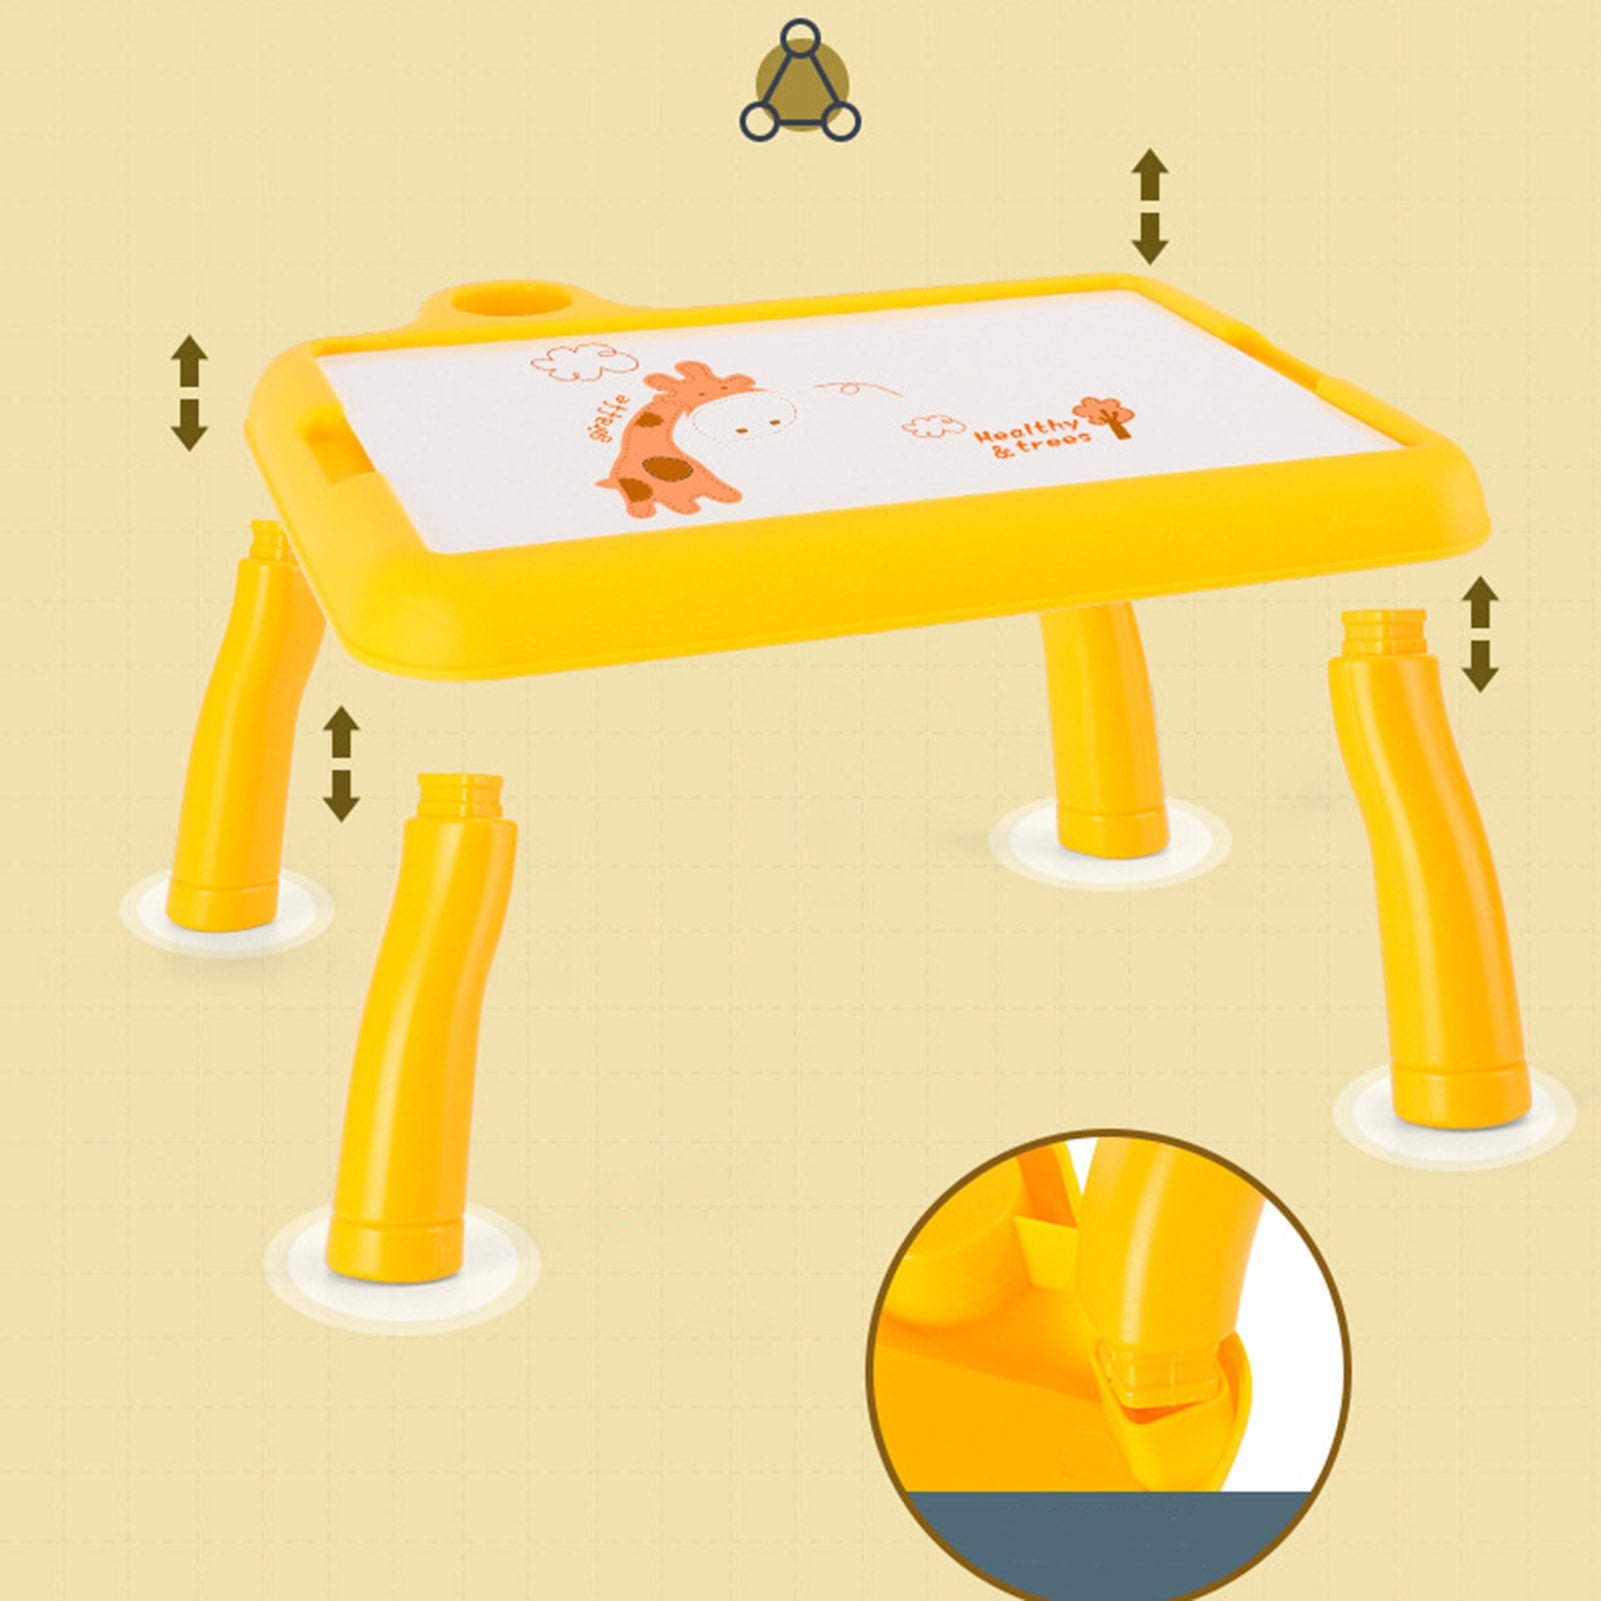 Children LED Projector - Art Drawing Table | Pinnacle Home